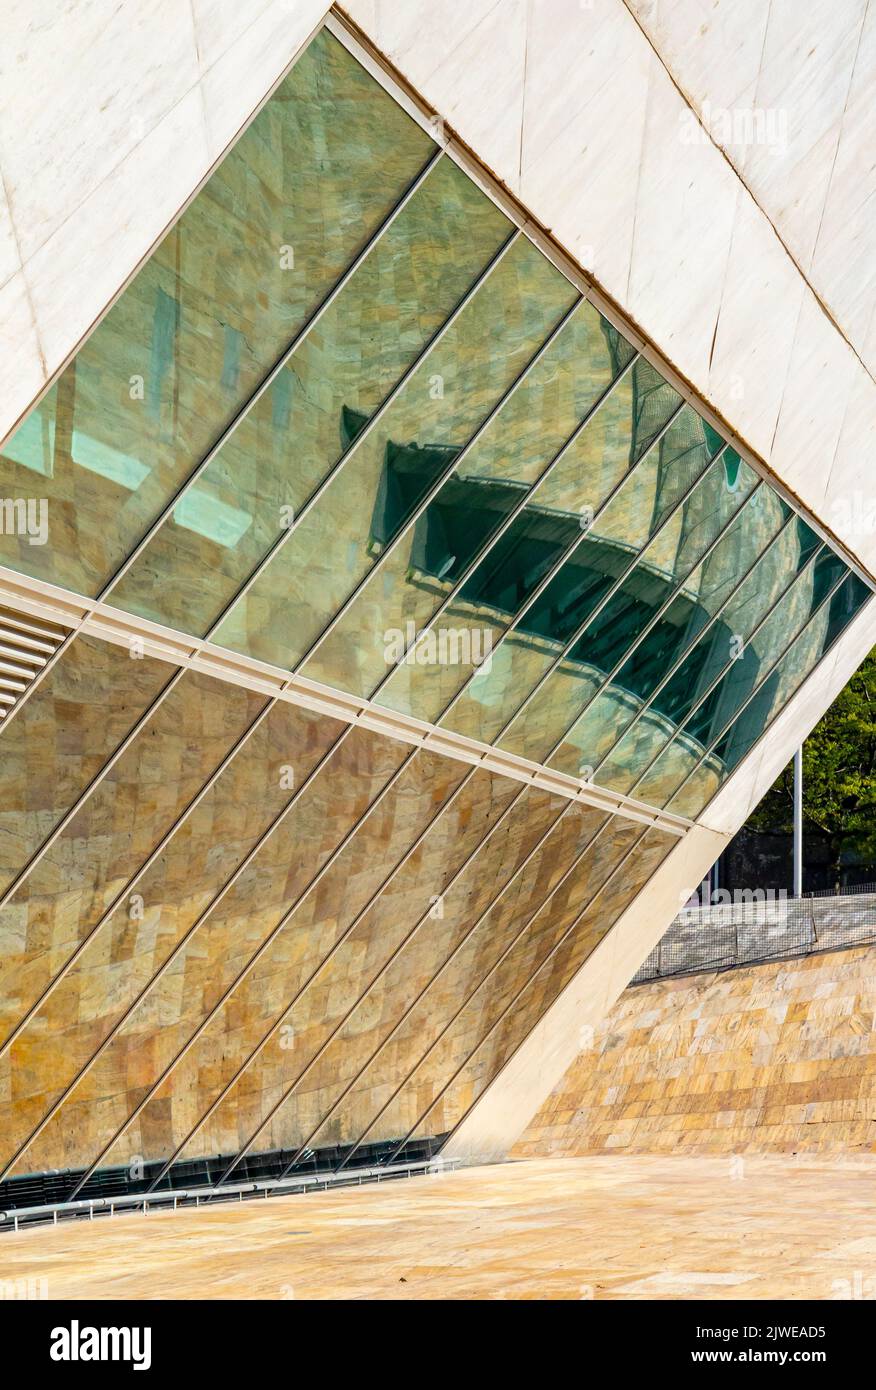 Exterior of Casa da Musica concert hall in Boavista Porto Portugal designed by Dutch architect Rem Koolhaas and opened in 2005. Stock Photo